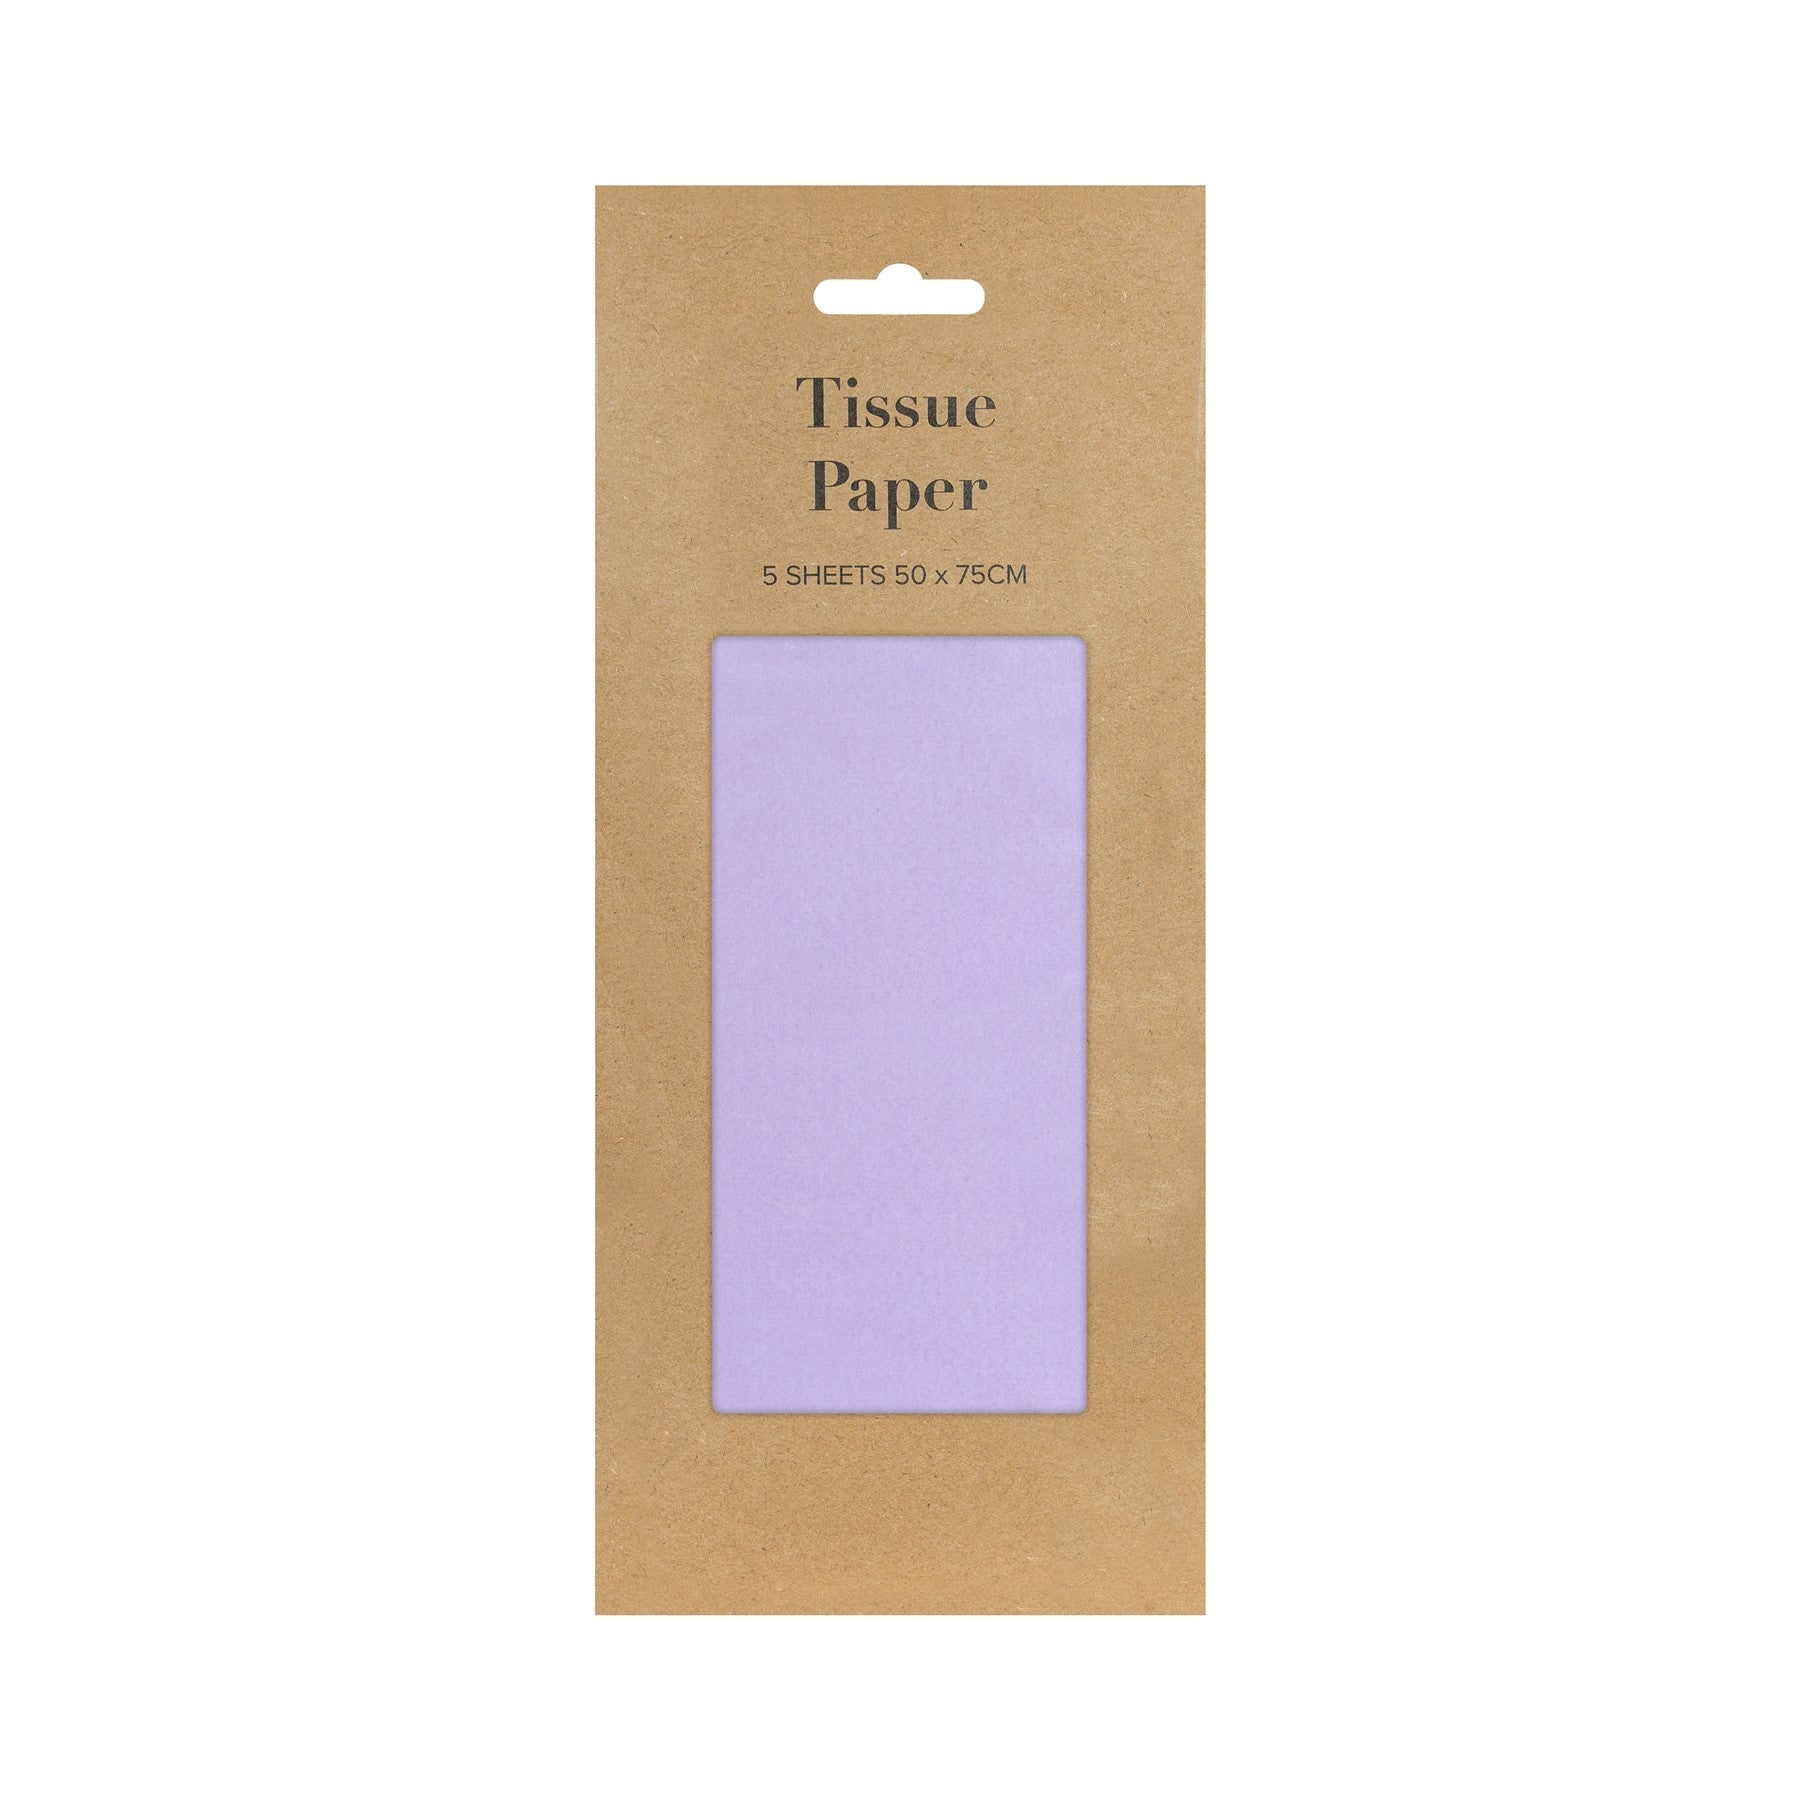 View Lilac Tissue Paper Pack 5 Sheets information